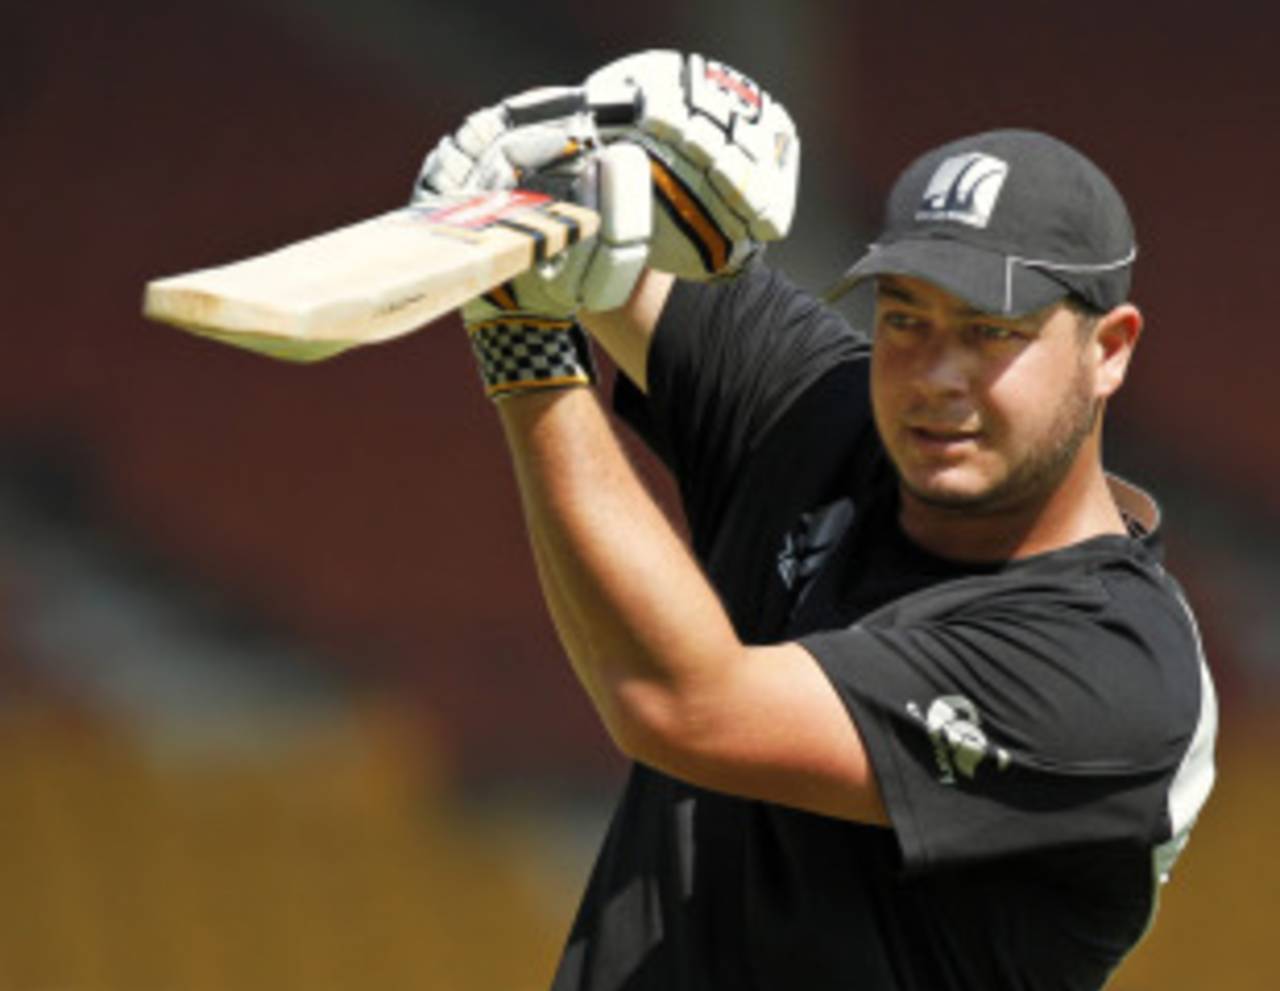 Jesse Ryder has a bat during New Zealand's training session, Ahmedabad, March 3, 2011